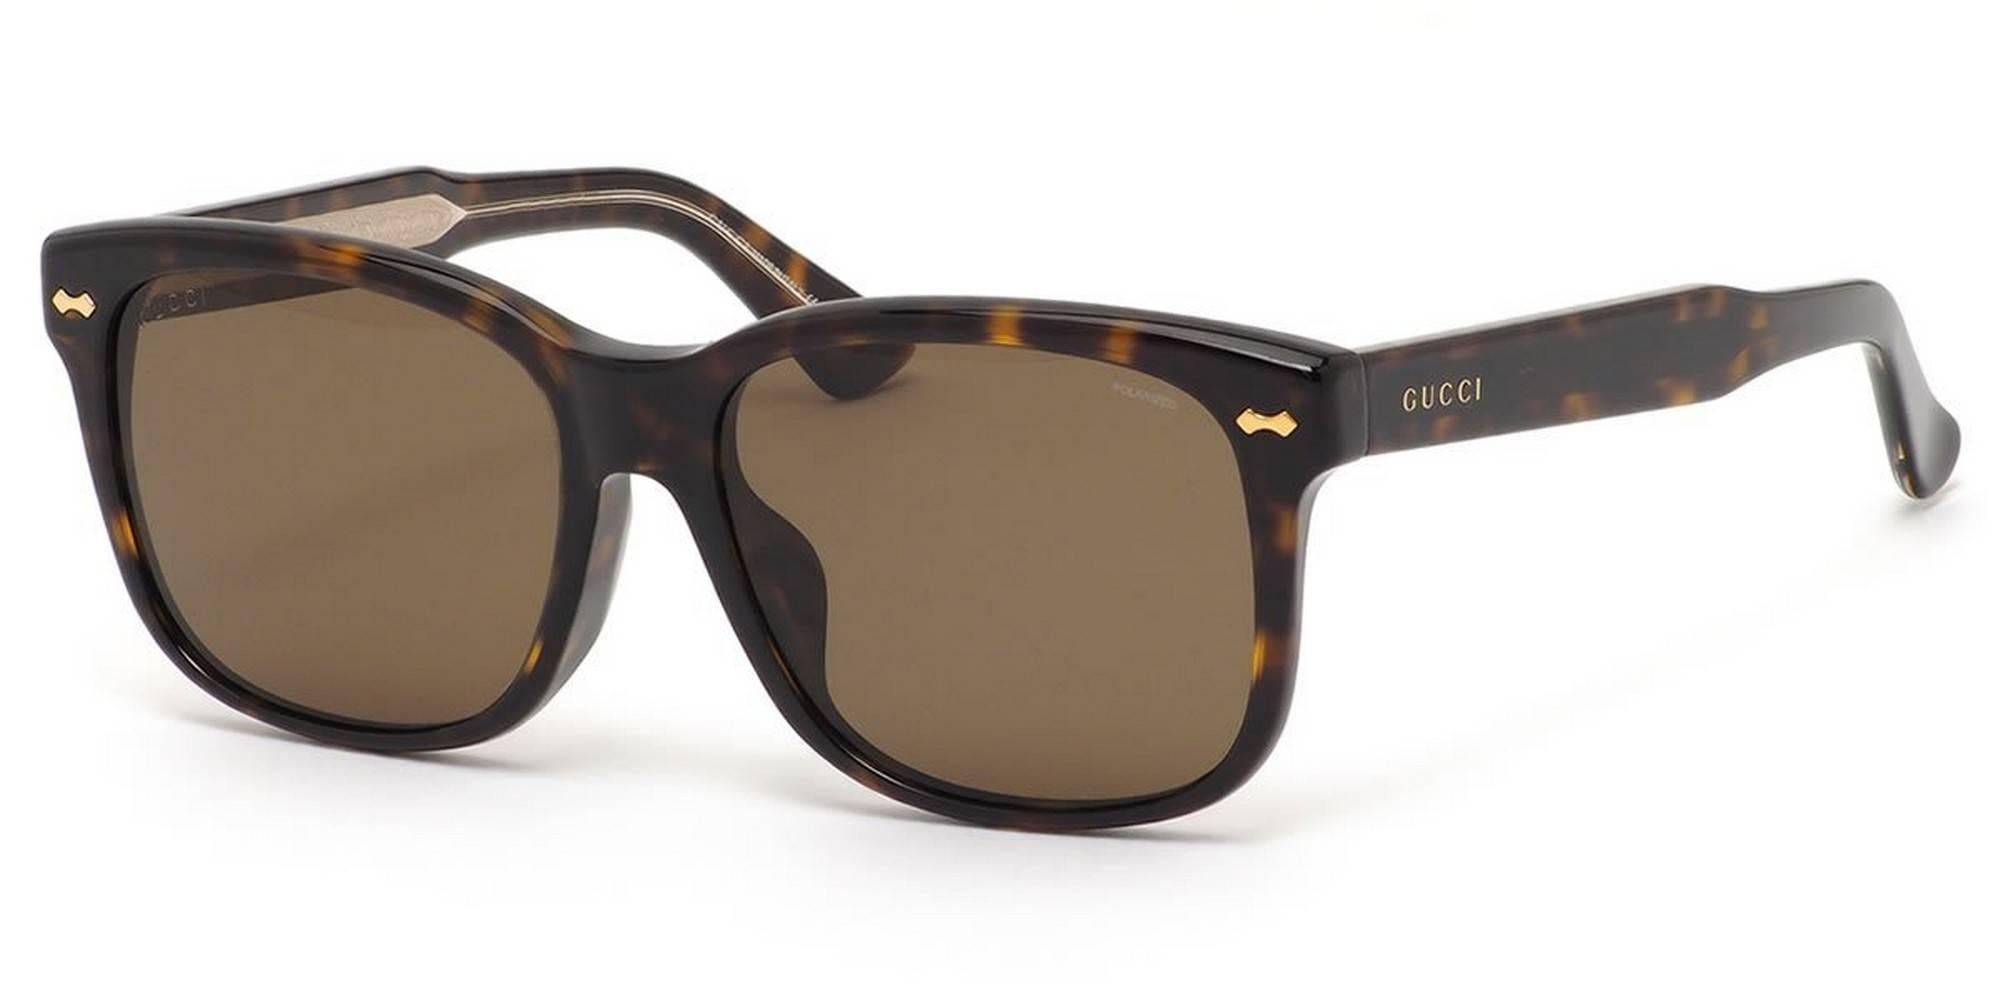 Gucci GG1140FS-KCLSP-57 Dark Havana / Brown Sunglasses

Frame : Acetate
Brand new with original case and cleaning cloth.
Made in Italy
